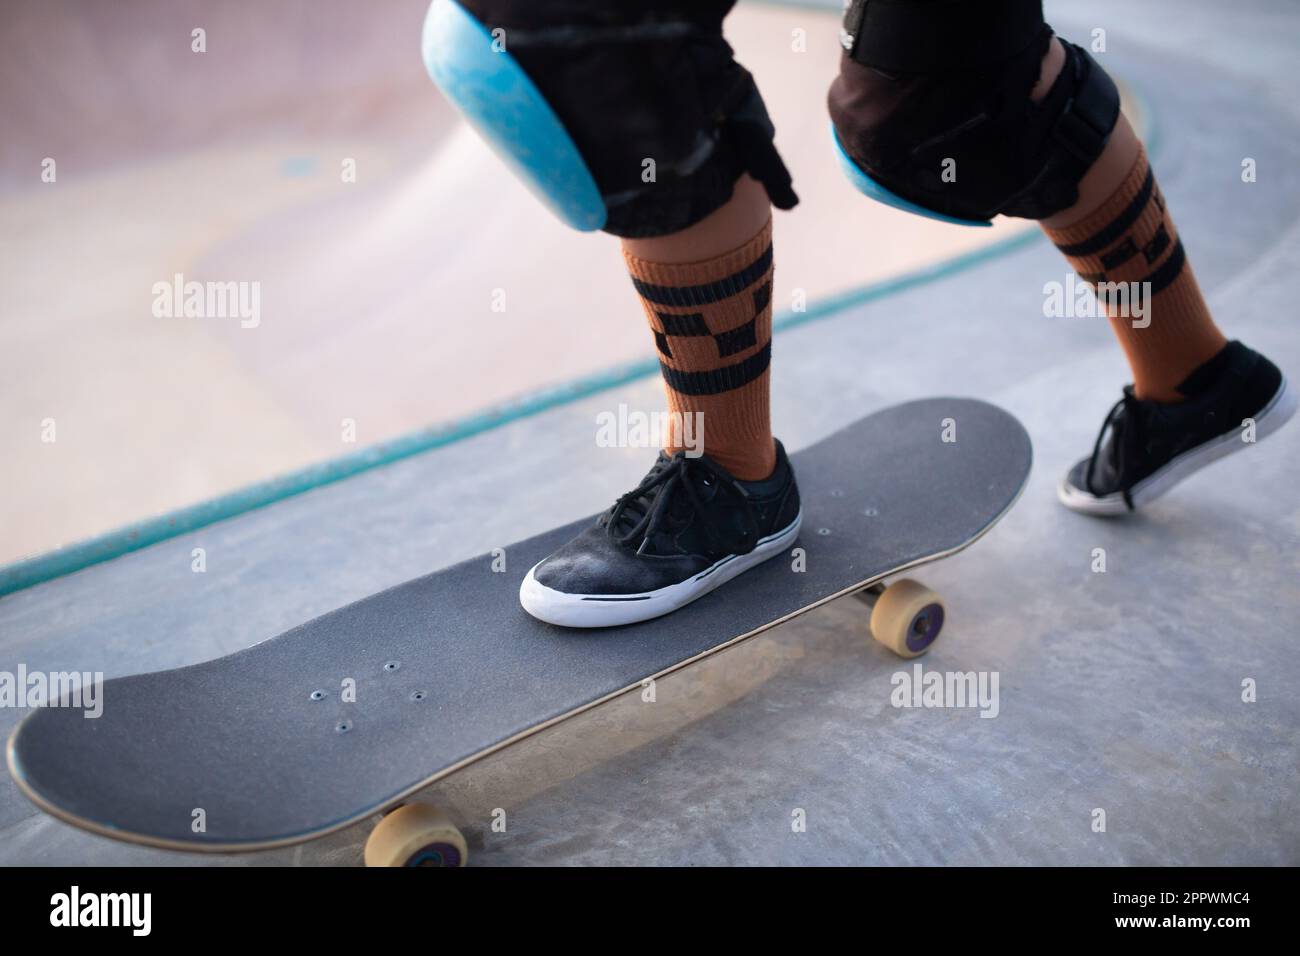 Skateboarding themed photograph with a natural lighting Stock Photo